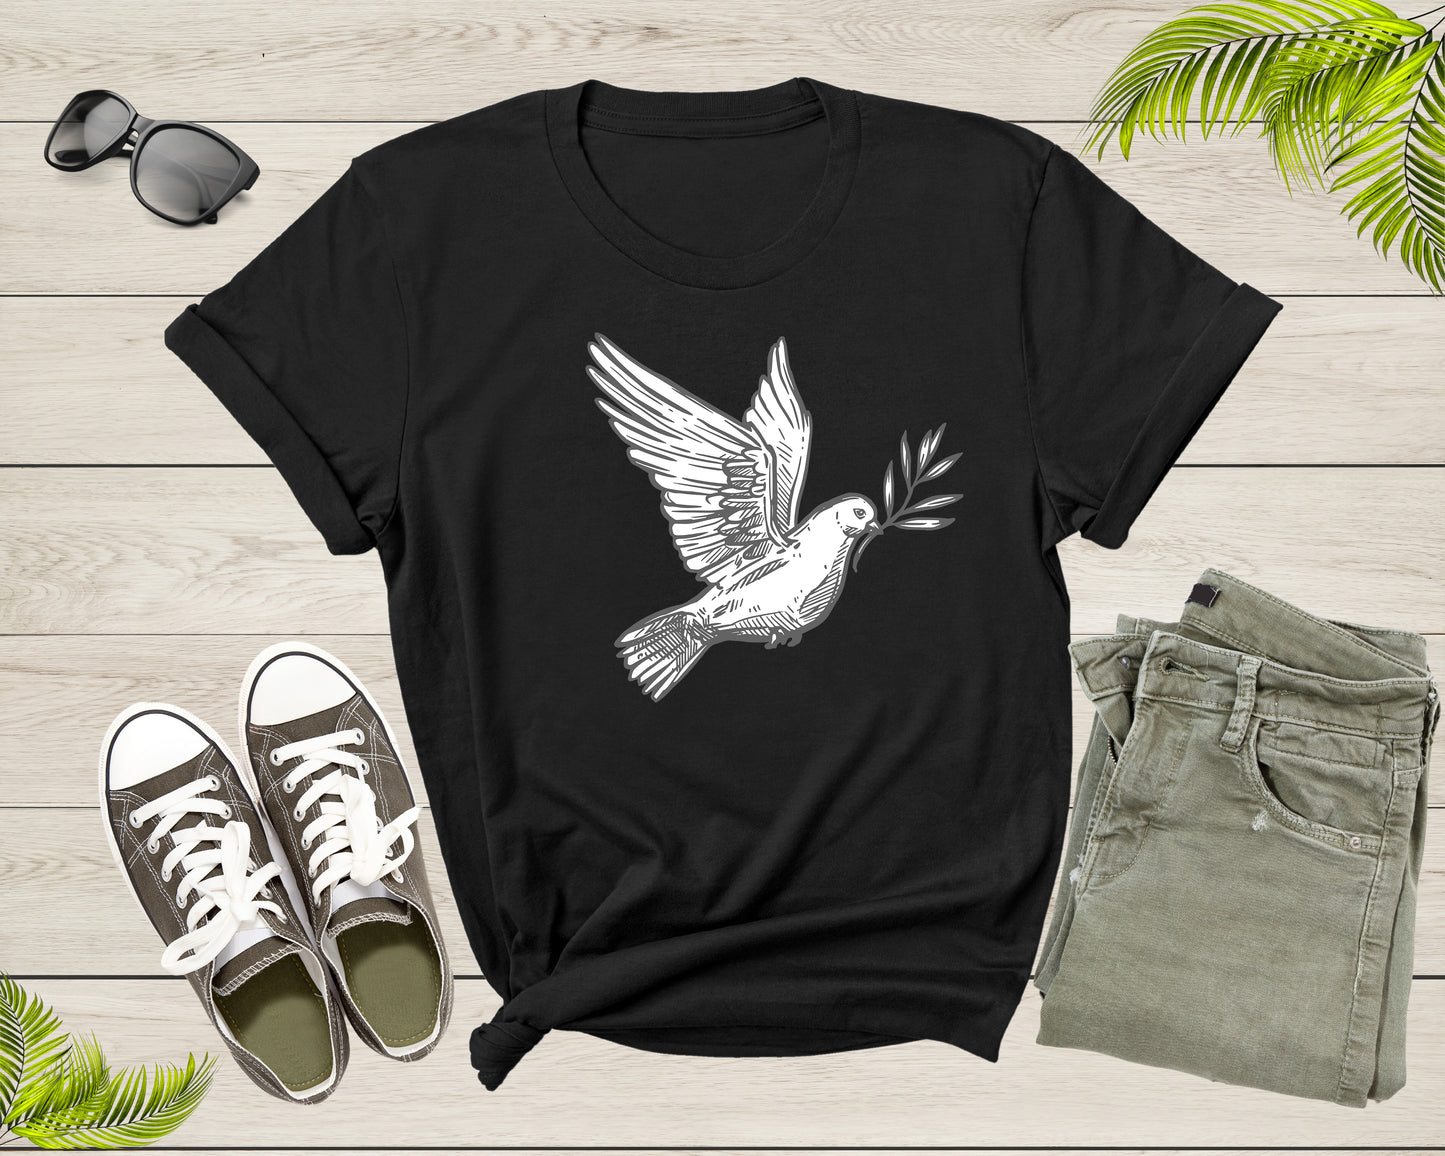 Flying White Dove Pigeon Bird with Olive Branch Peace Symbol T-Shirt Dove Lover Gift T Shirt for Men Women Kids Boys Girls Graphic Tshirt